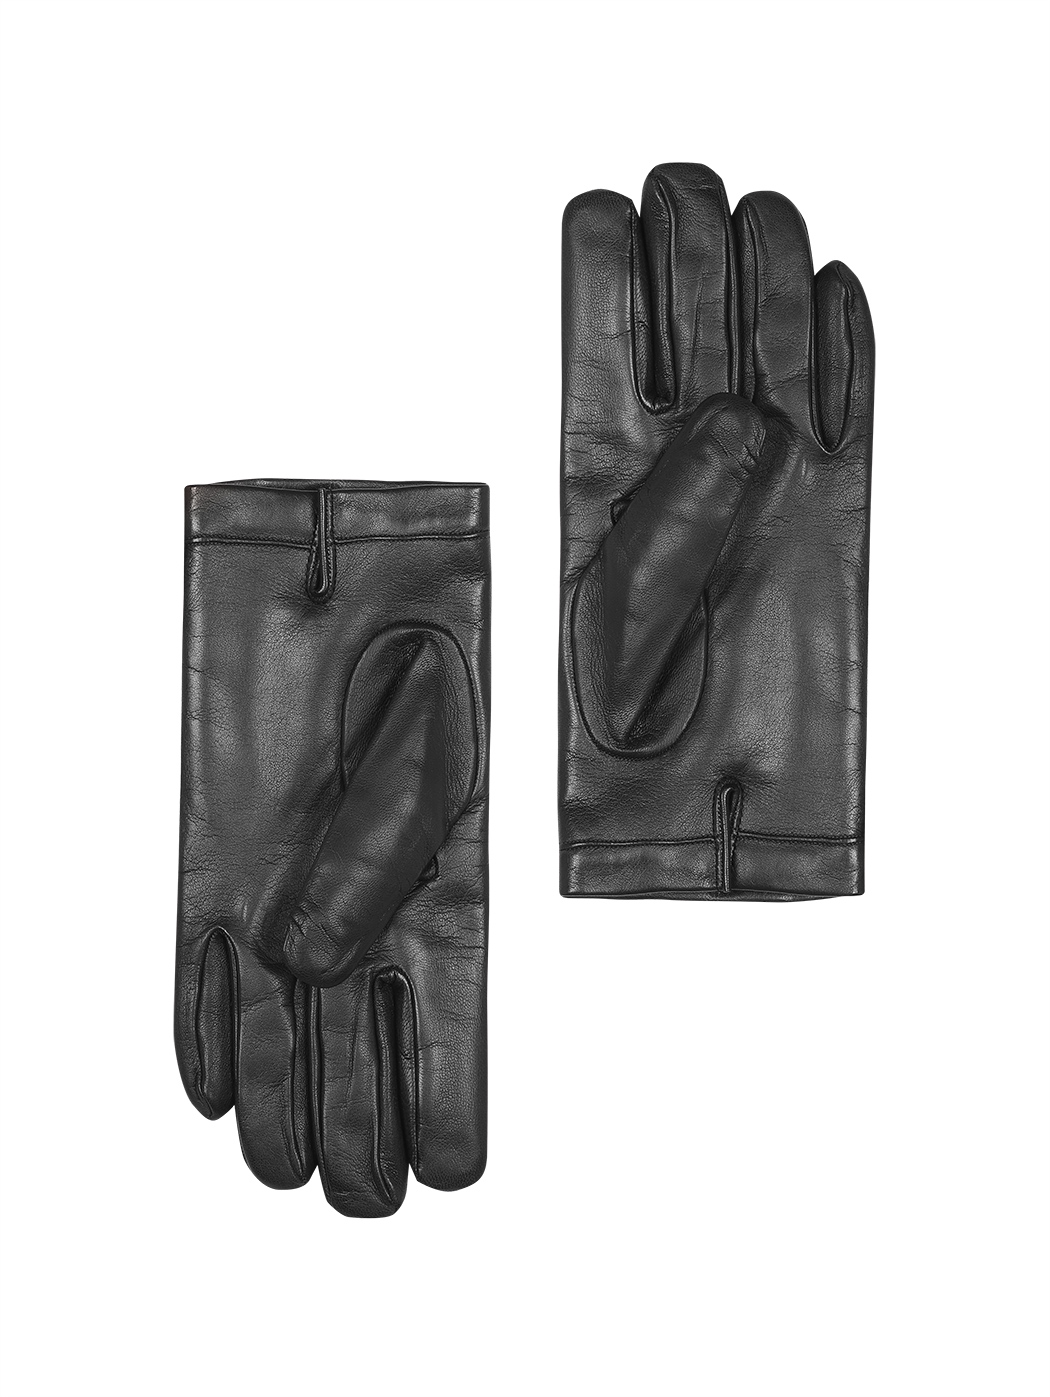 Men's Lined Gloves in Leather & Cashmere  Black